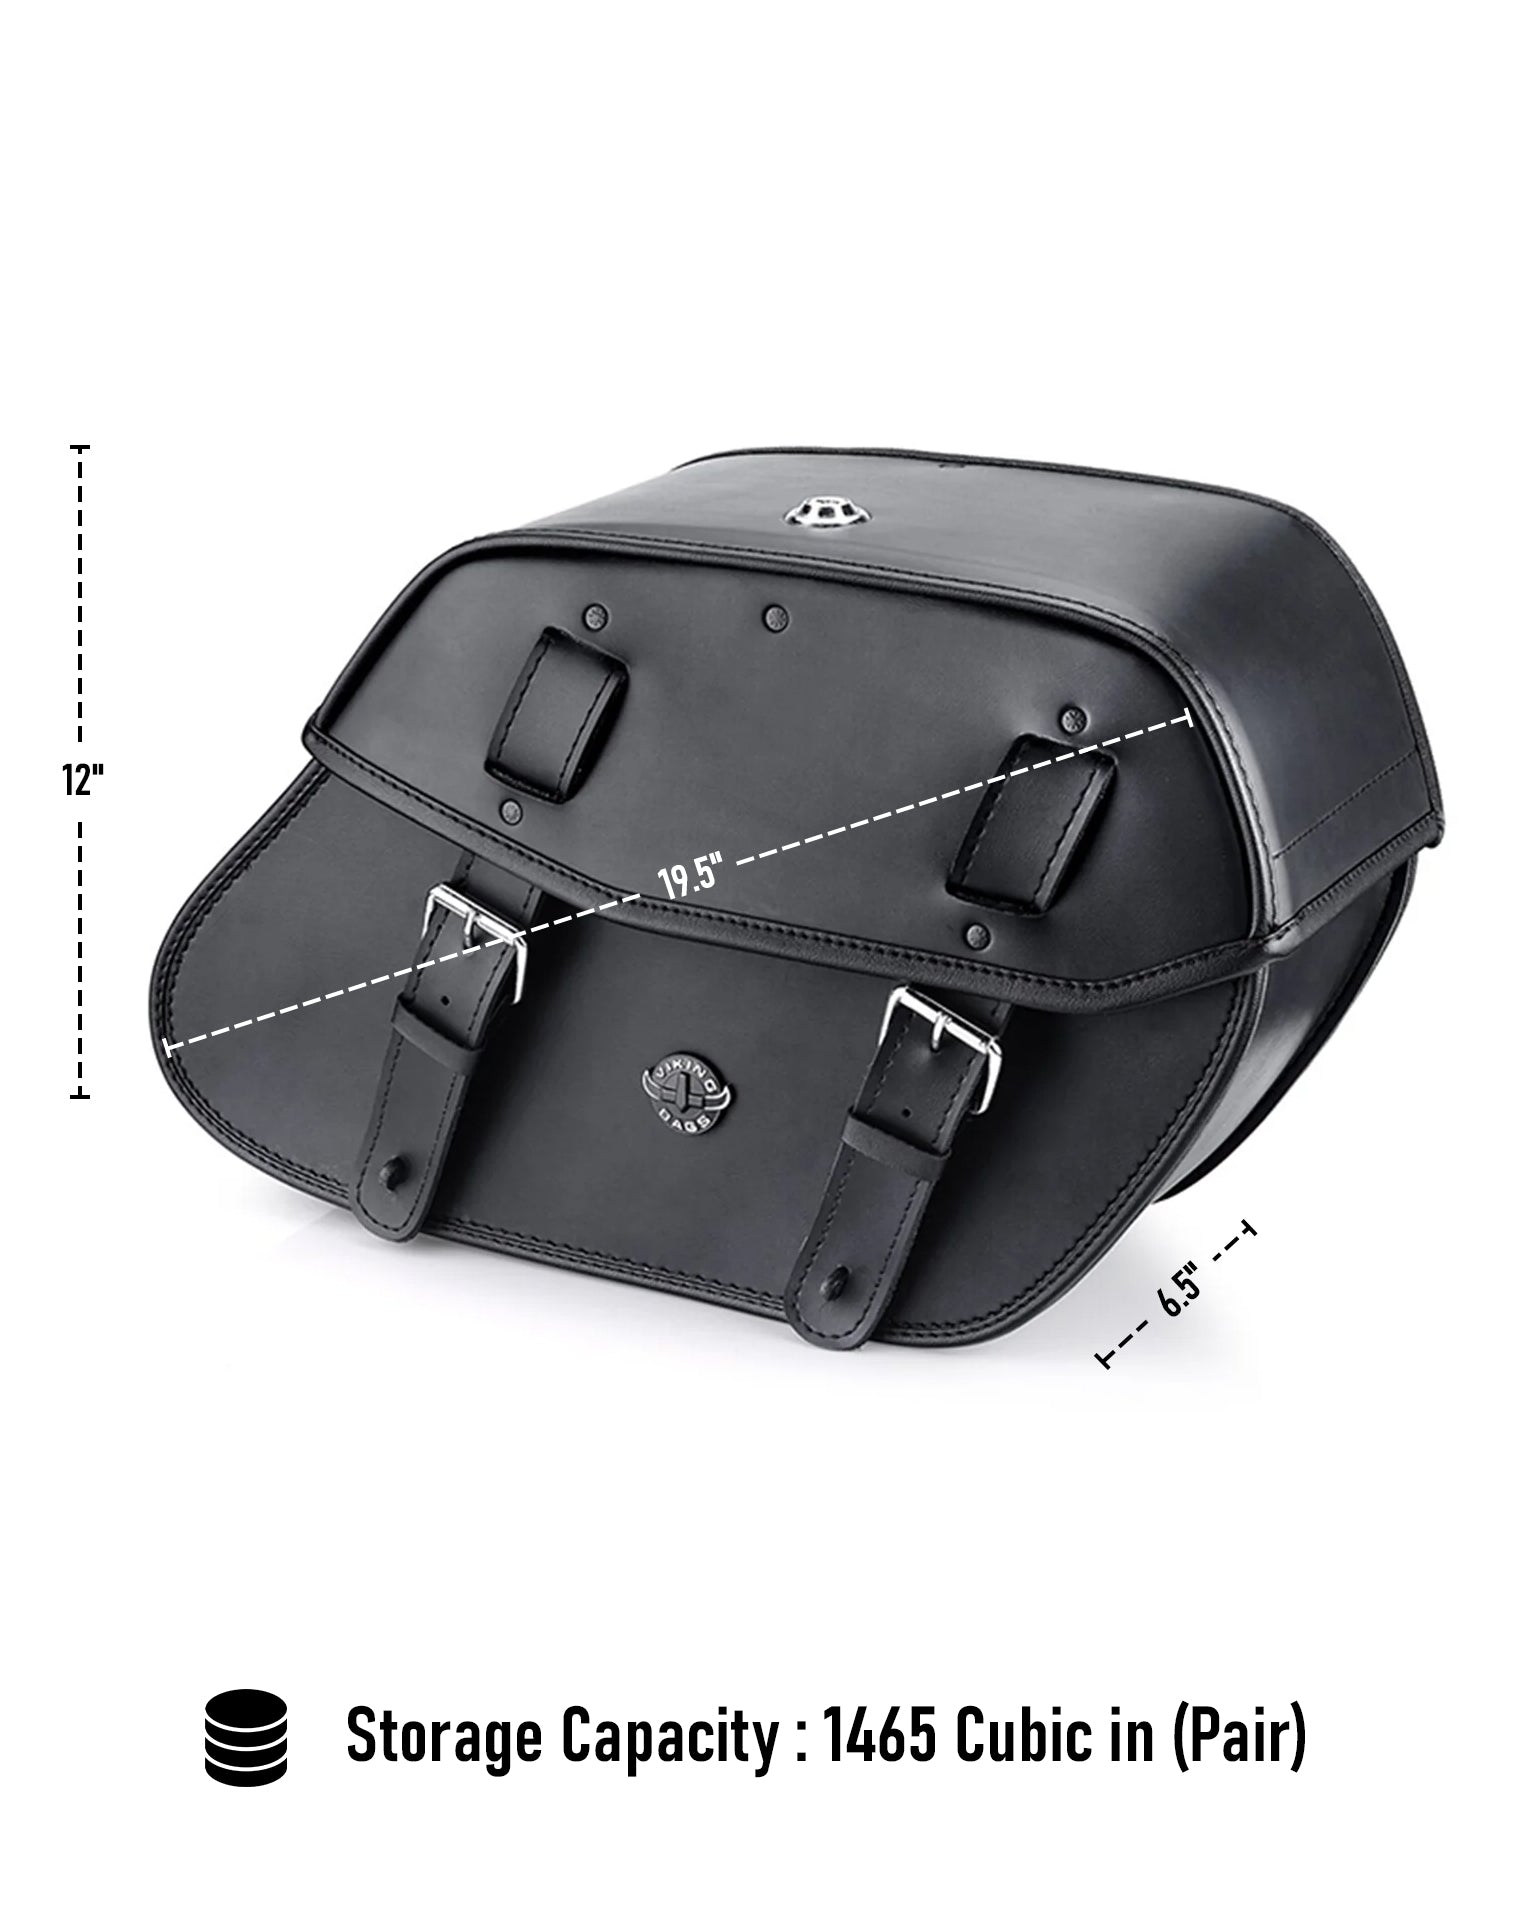 Viking Odin Large Honda Vtx 1300 C Leather Motorcycle Saddlebags Can Store Your Ridings Gears